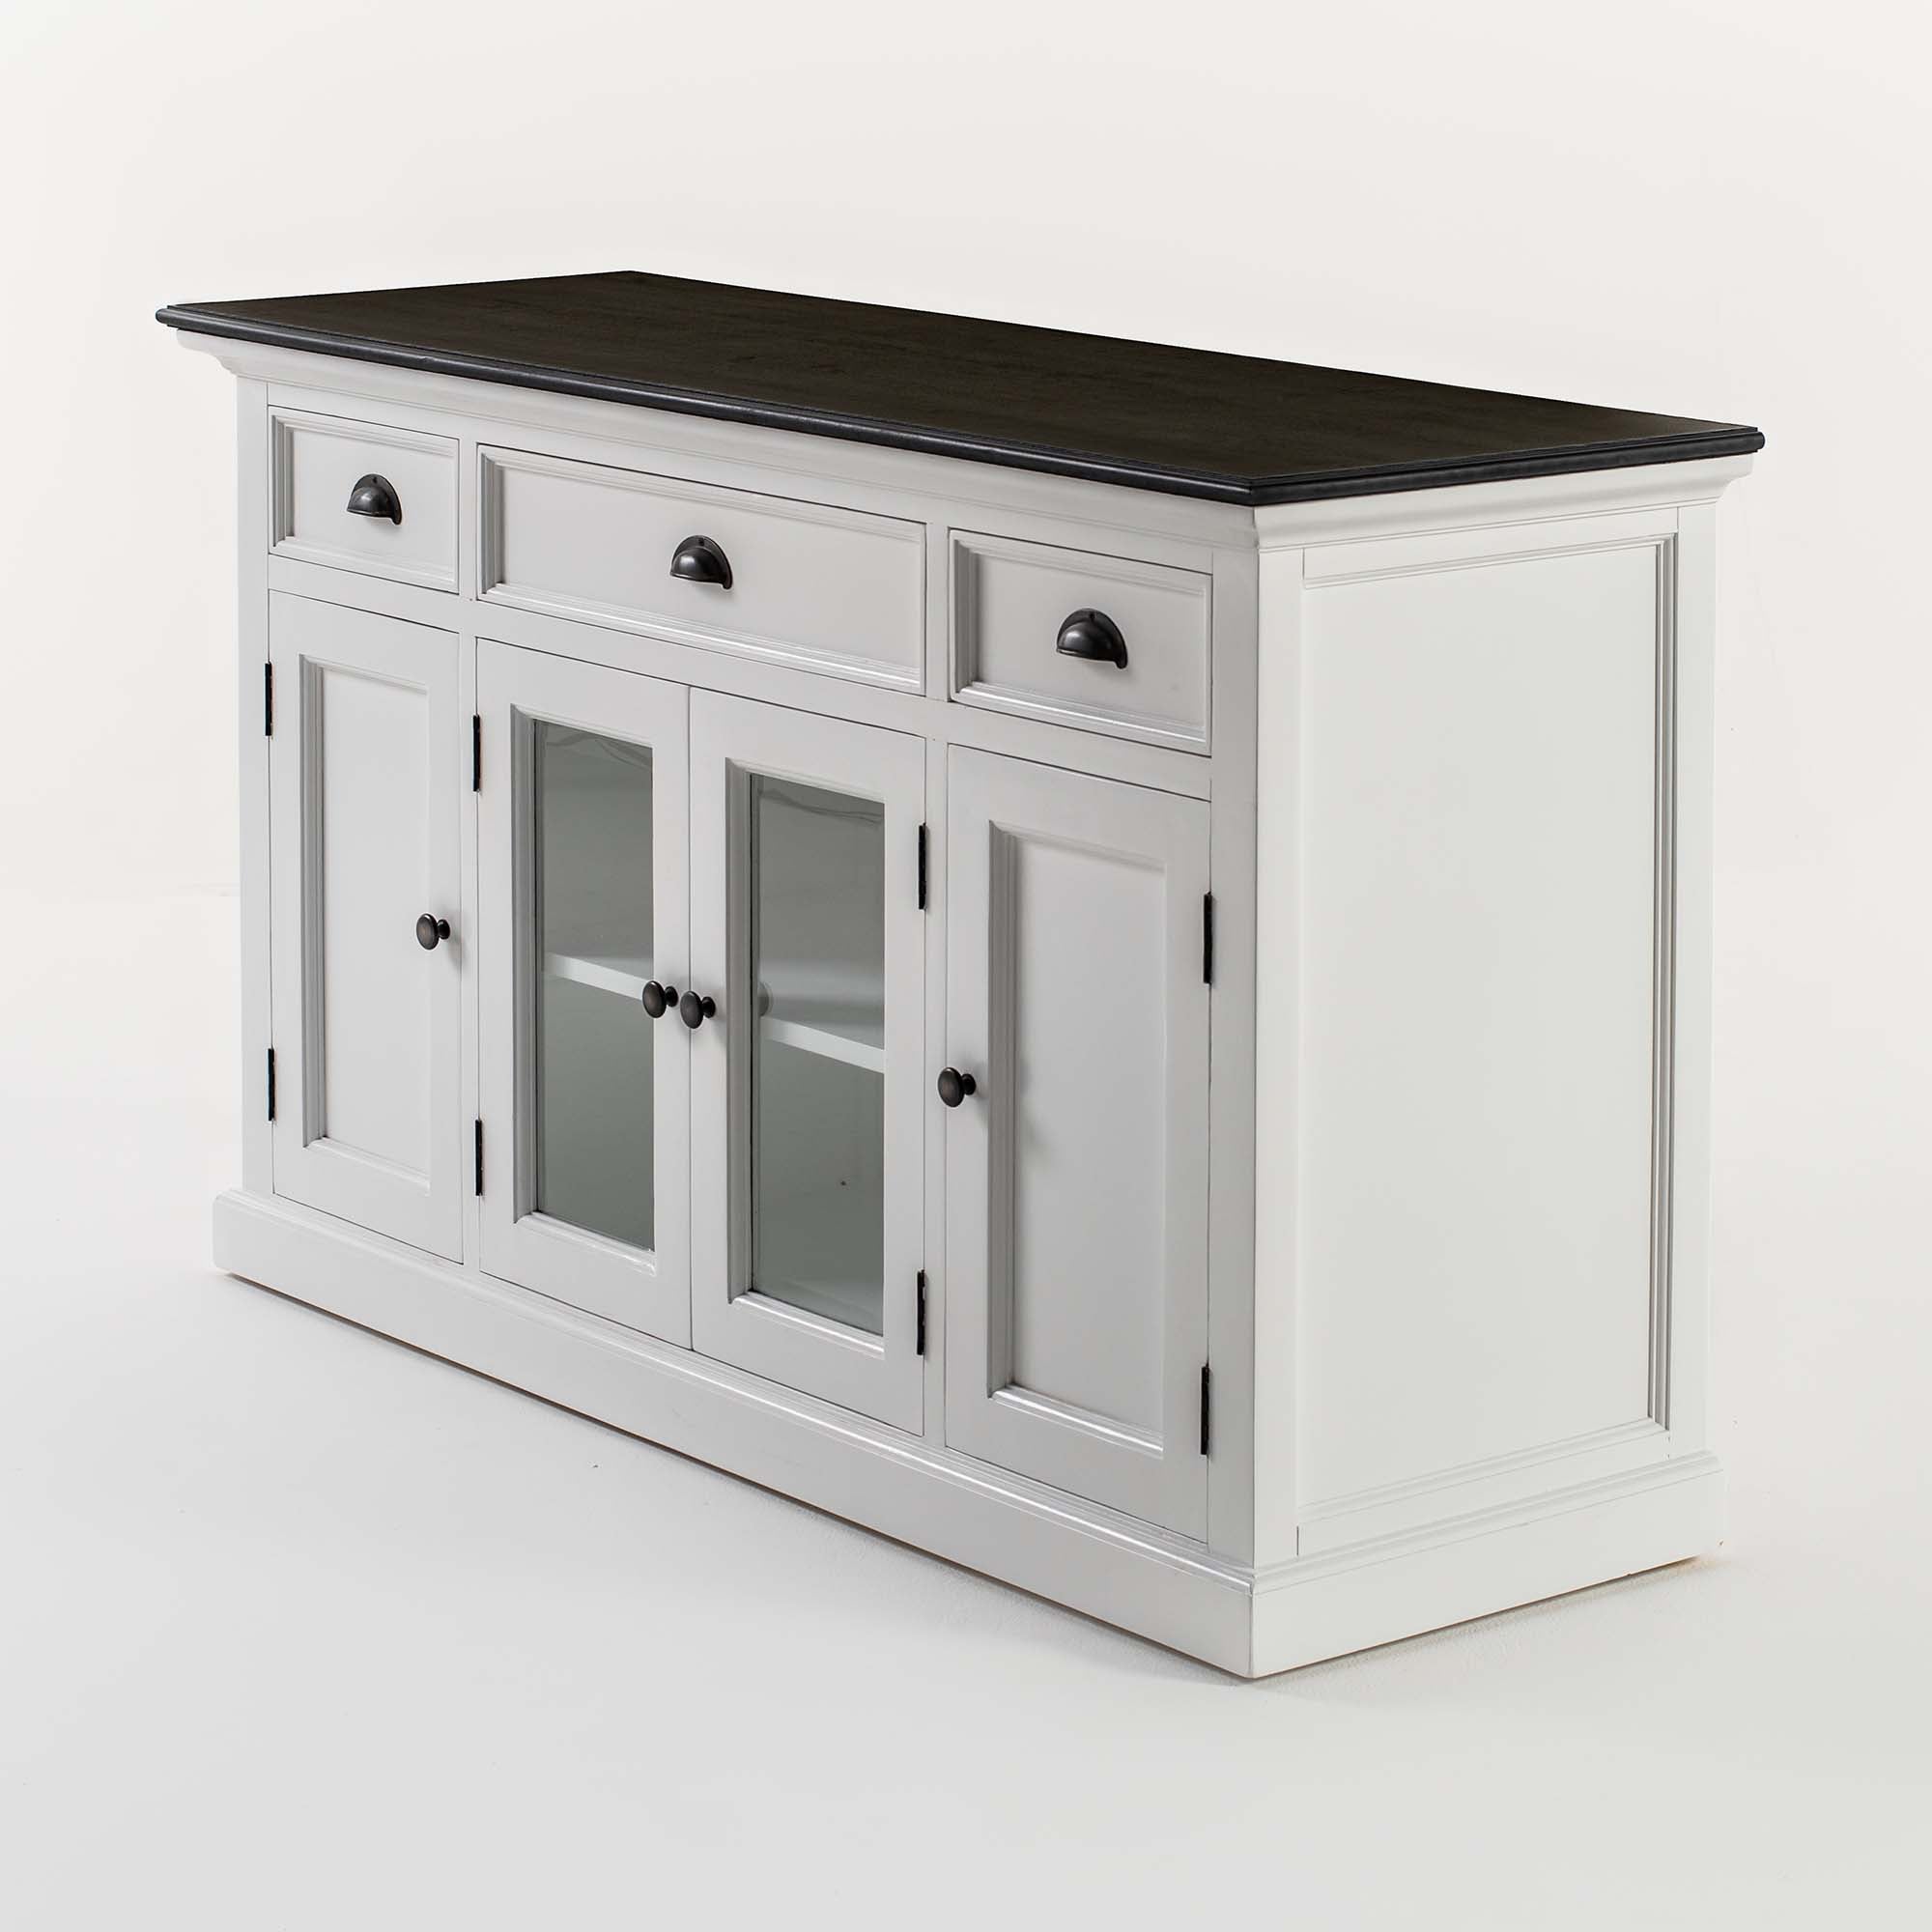 Halifax Contrast sideboard with 4 doors and 3 drawers